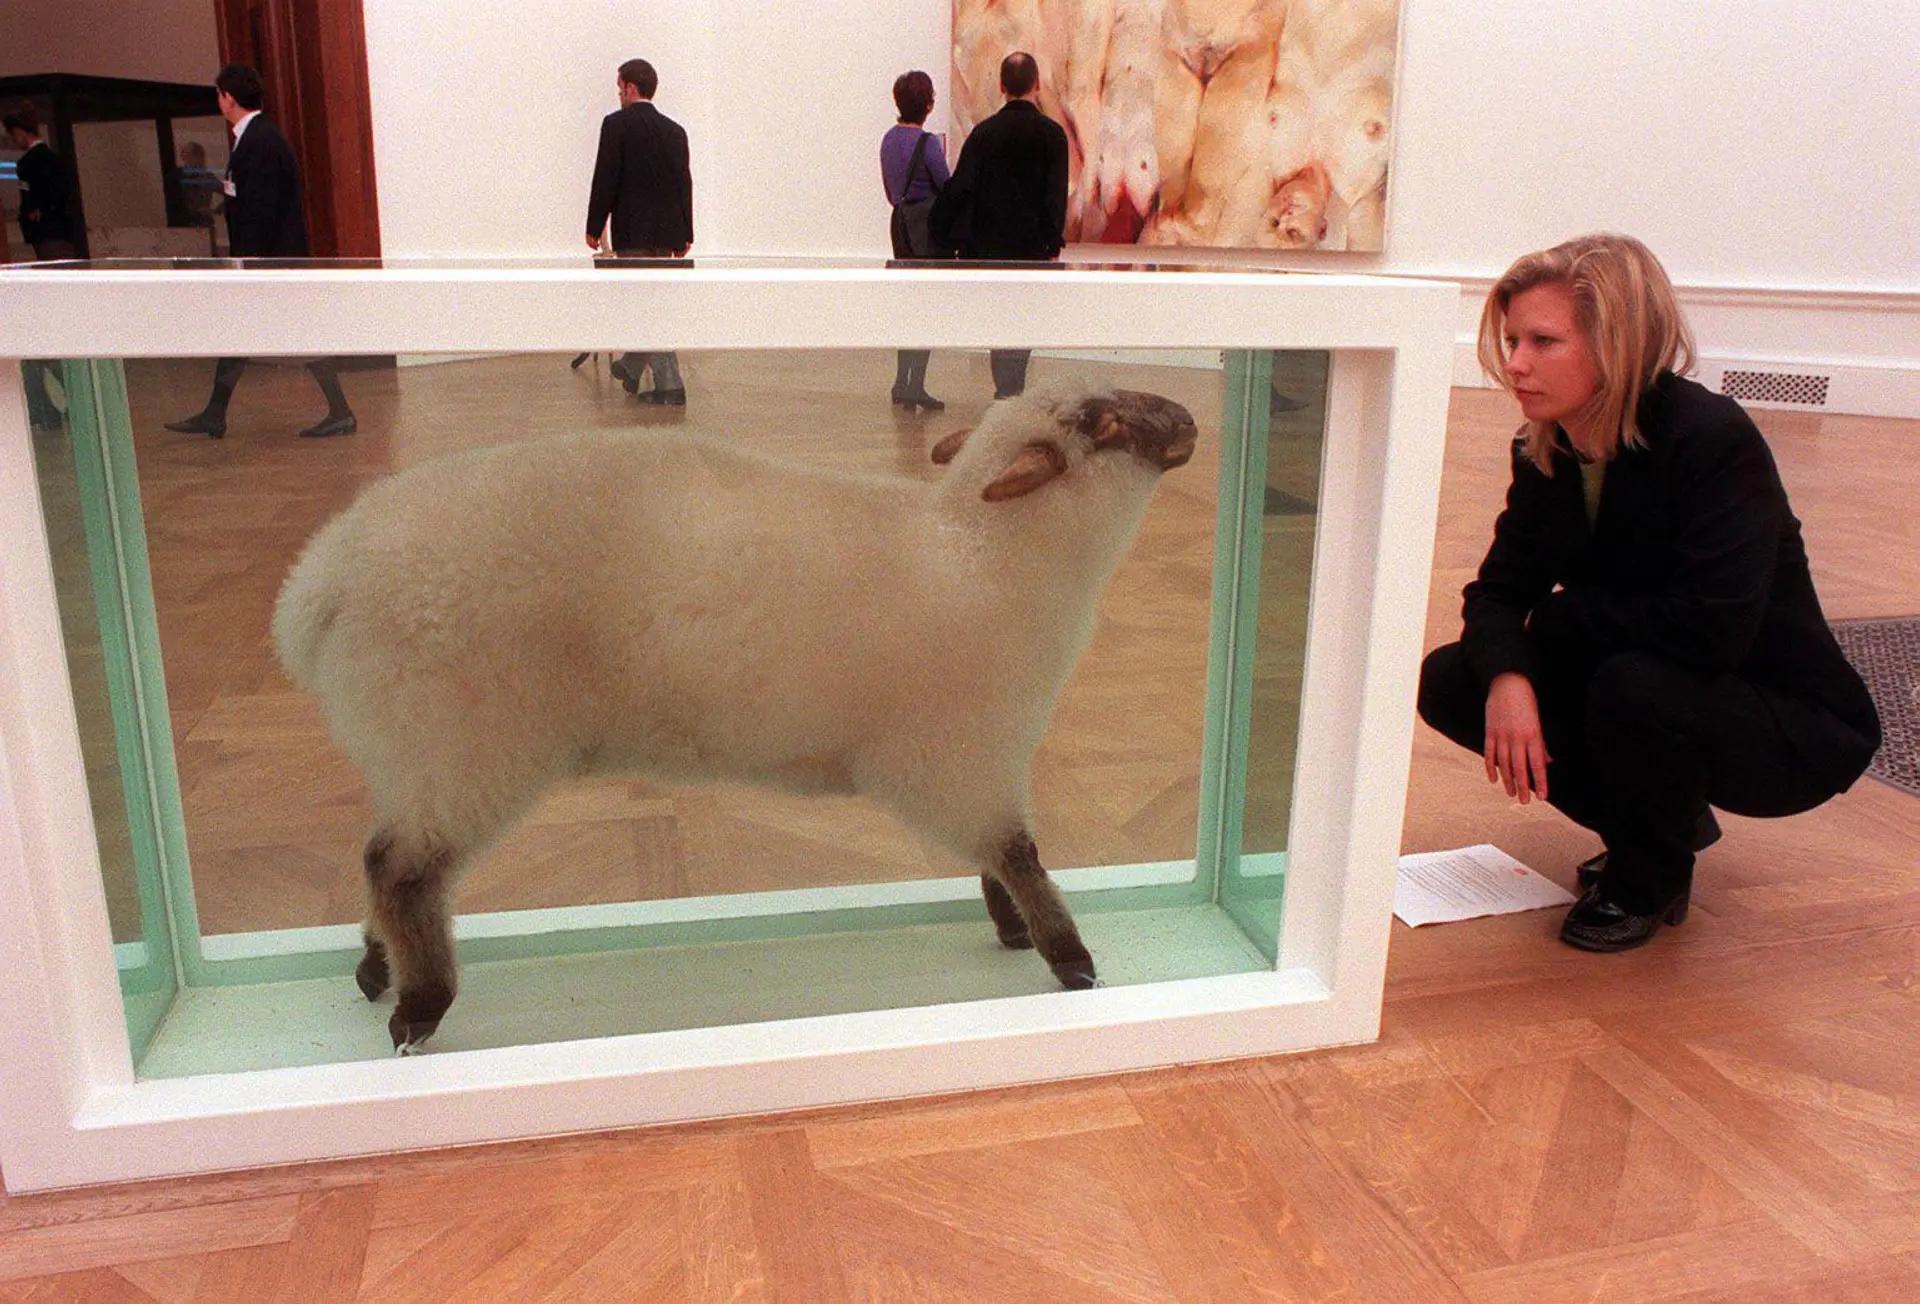 Damien Hirst, Away from the Flock (1994) on display at Sensation at The Royal Academy of Arts in London, 1997 © Damien Hirst and Science Ltd. All rights reserved, DACS 2022. Installation photograph: PA Images / Alamy Stock Photo